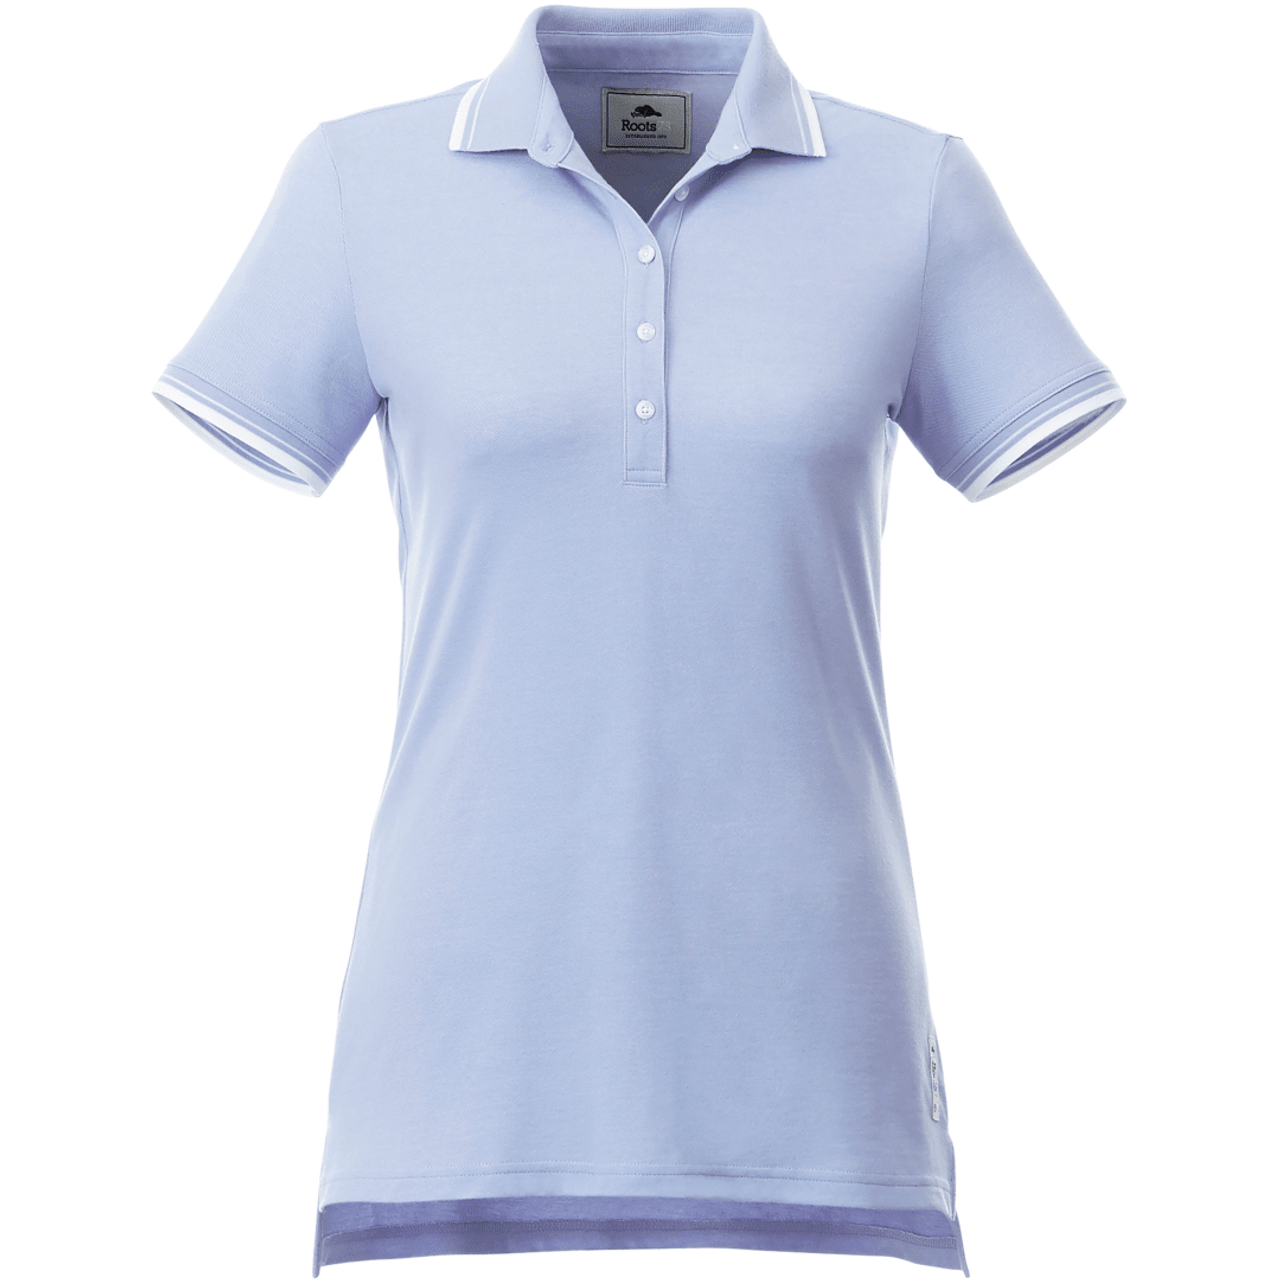 Solace Blue/White (433)